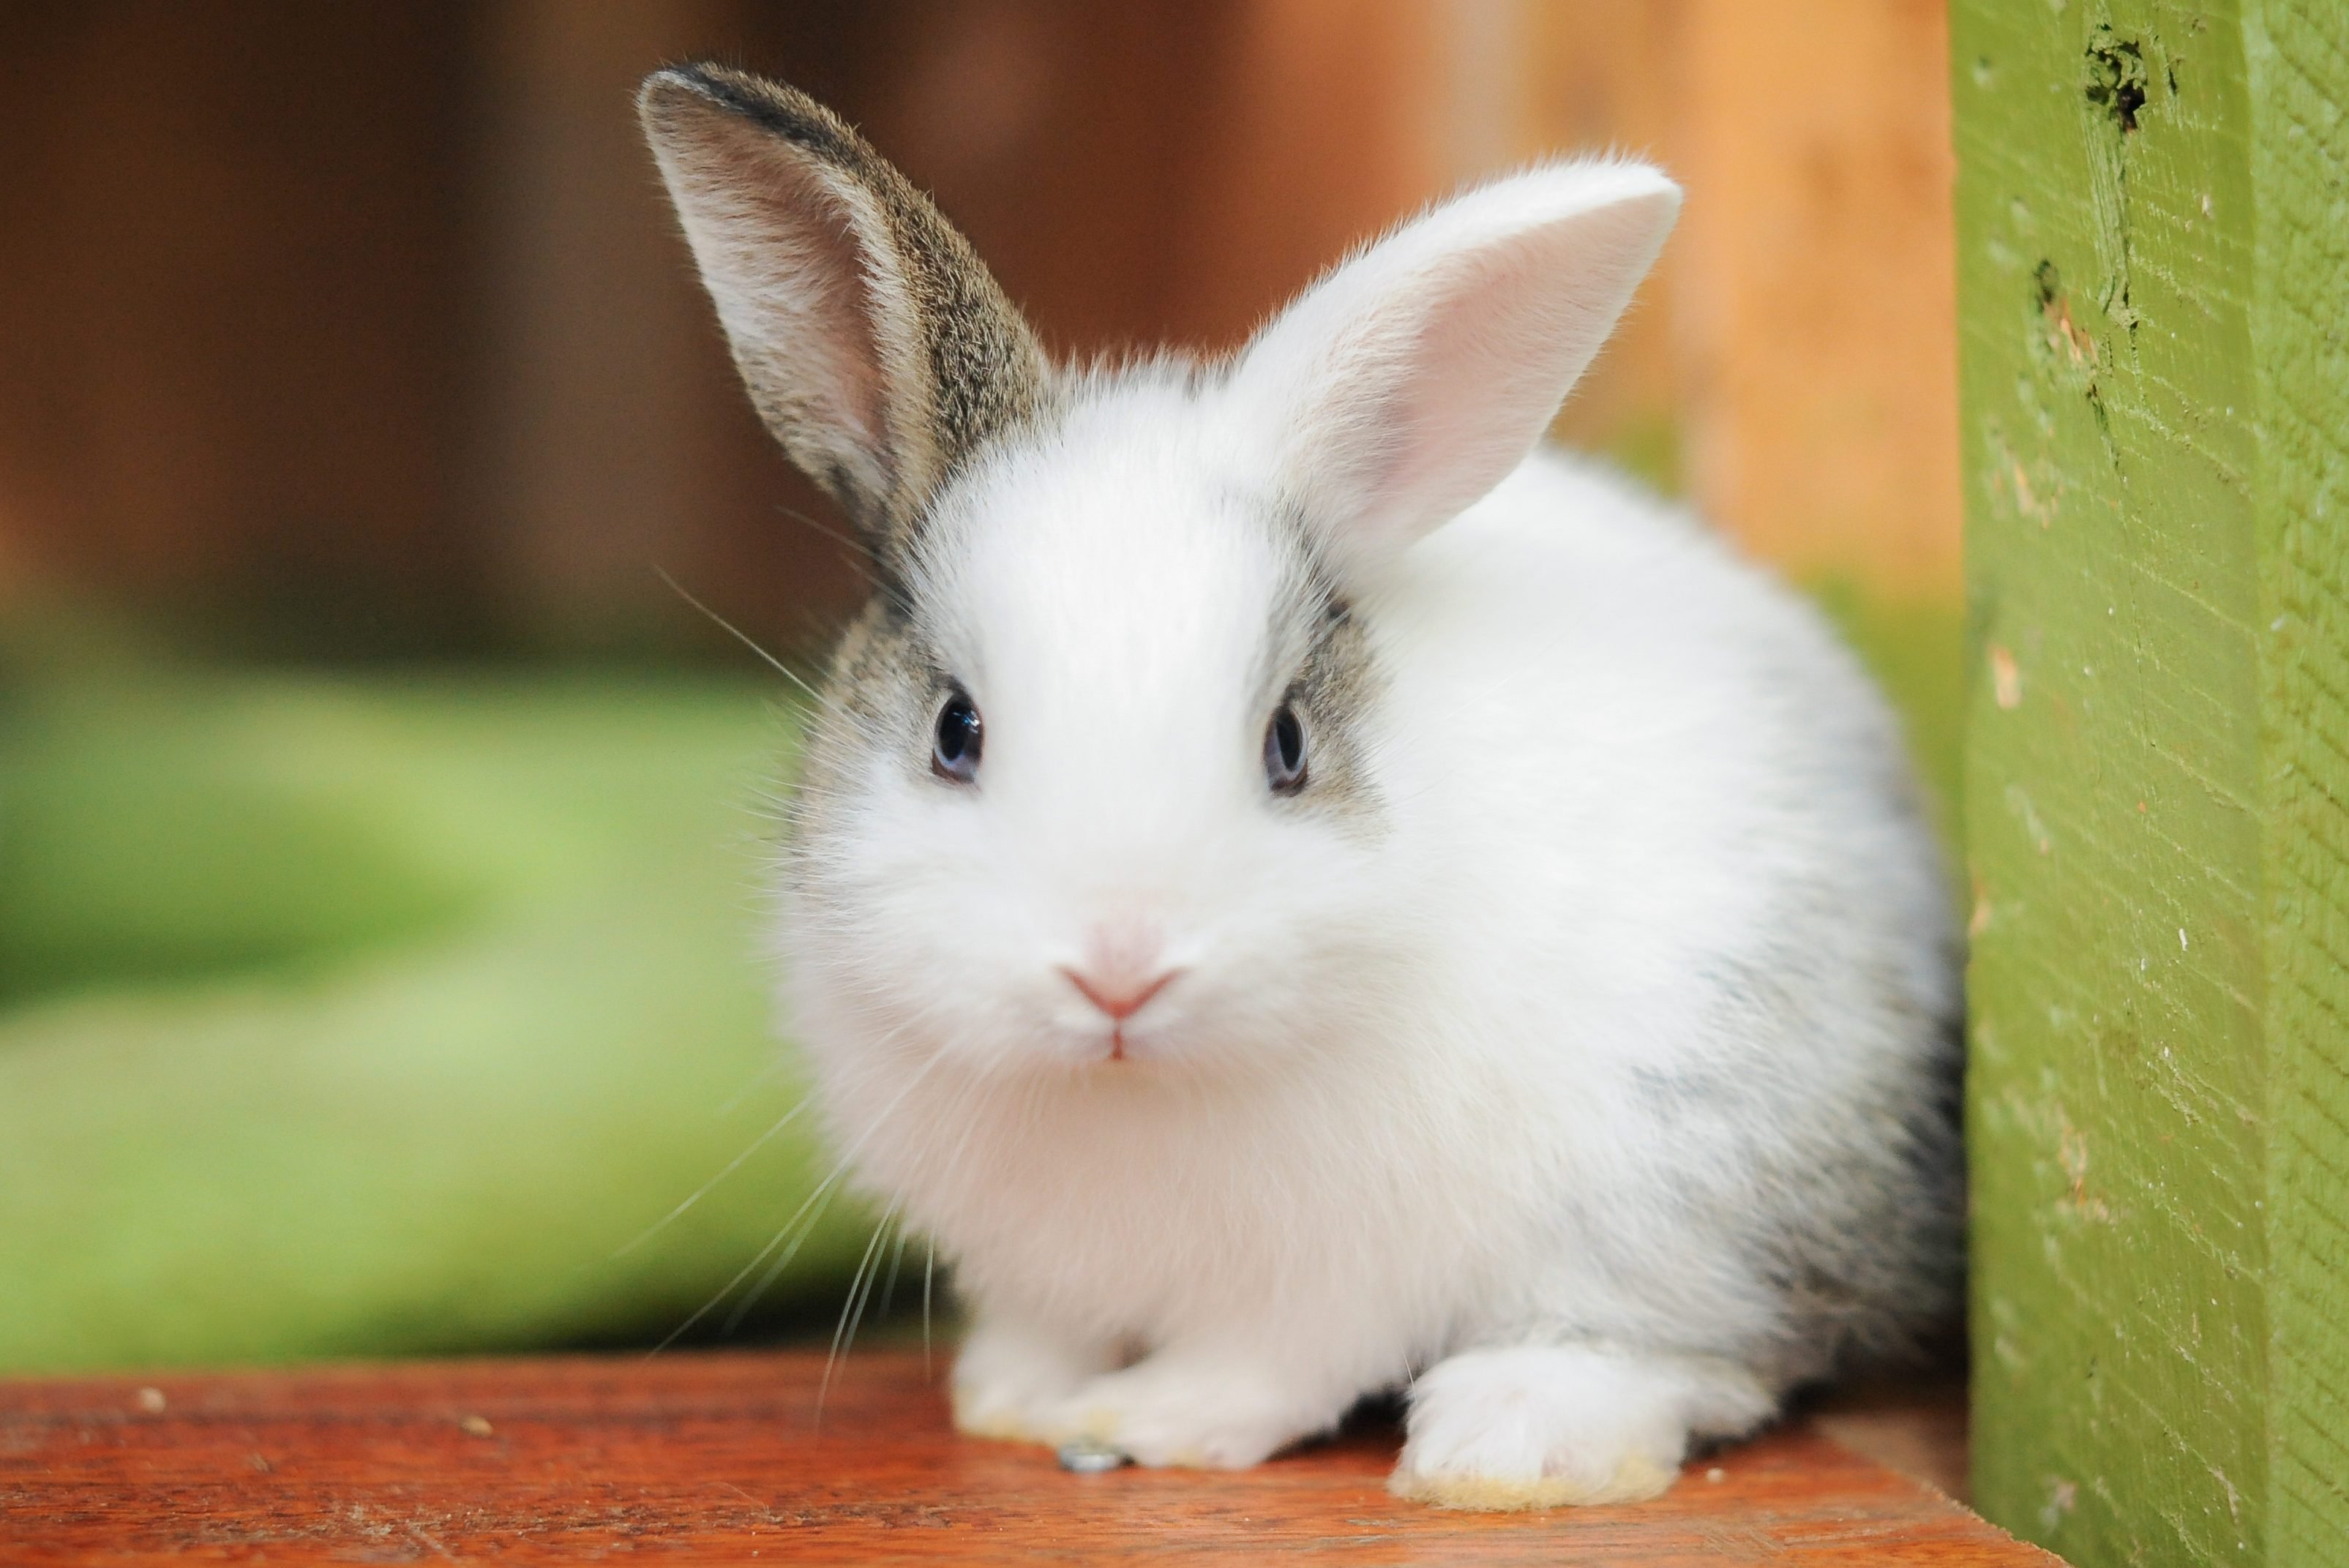 30 Cute Bunny Pictures to Make You Smile — Adorable Bunnies